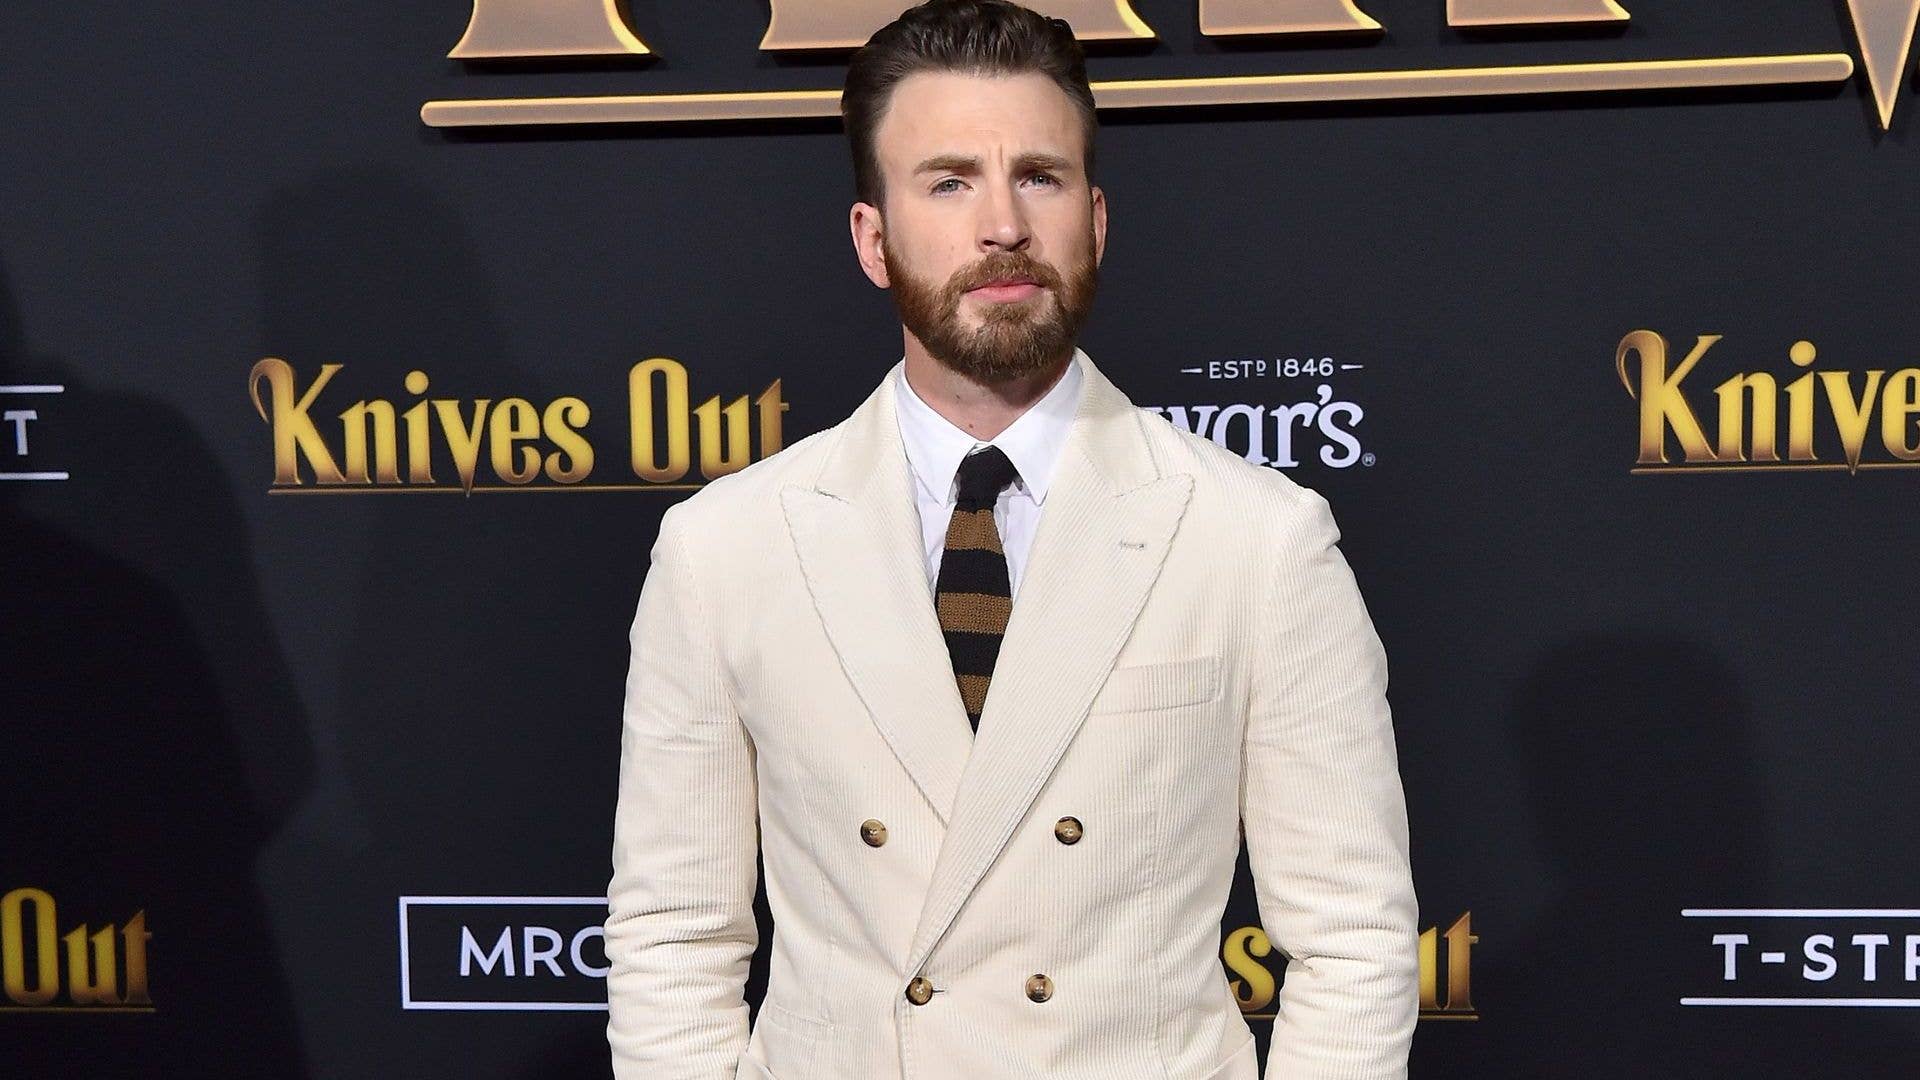 Chris Evans poses at the "Knives Out" premiere